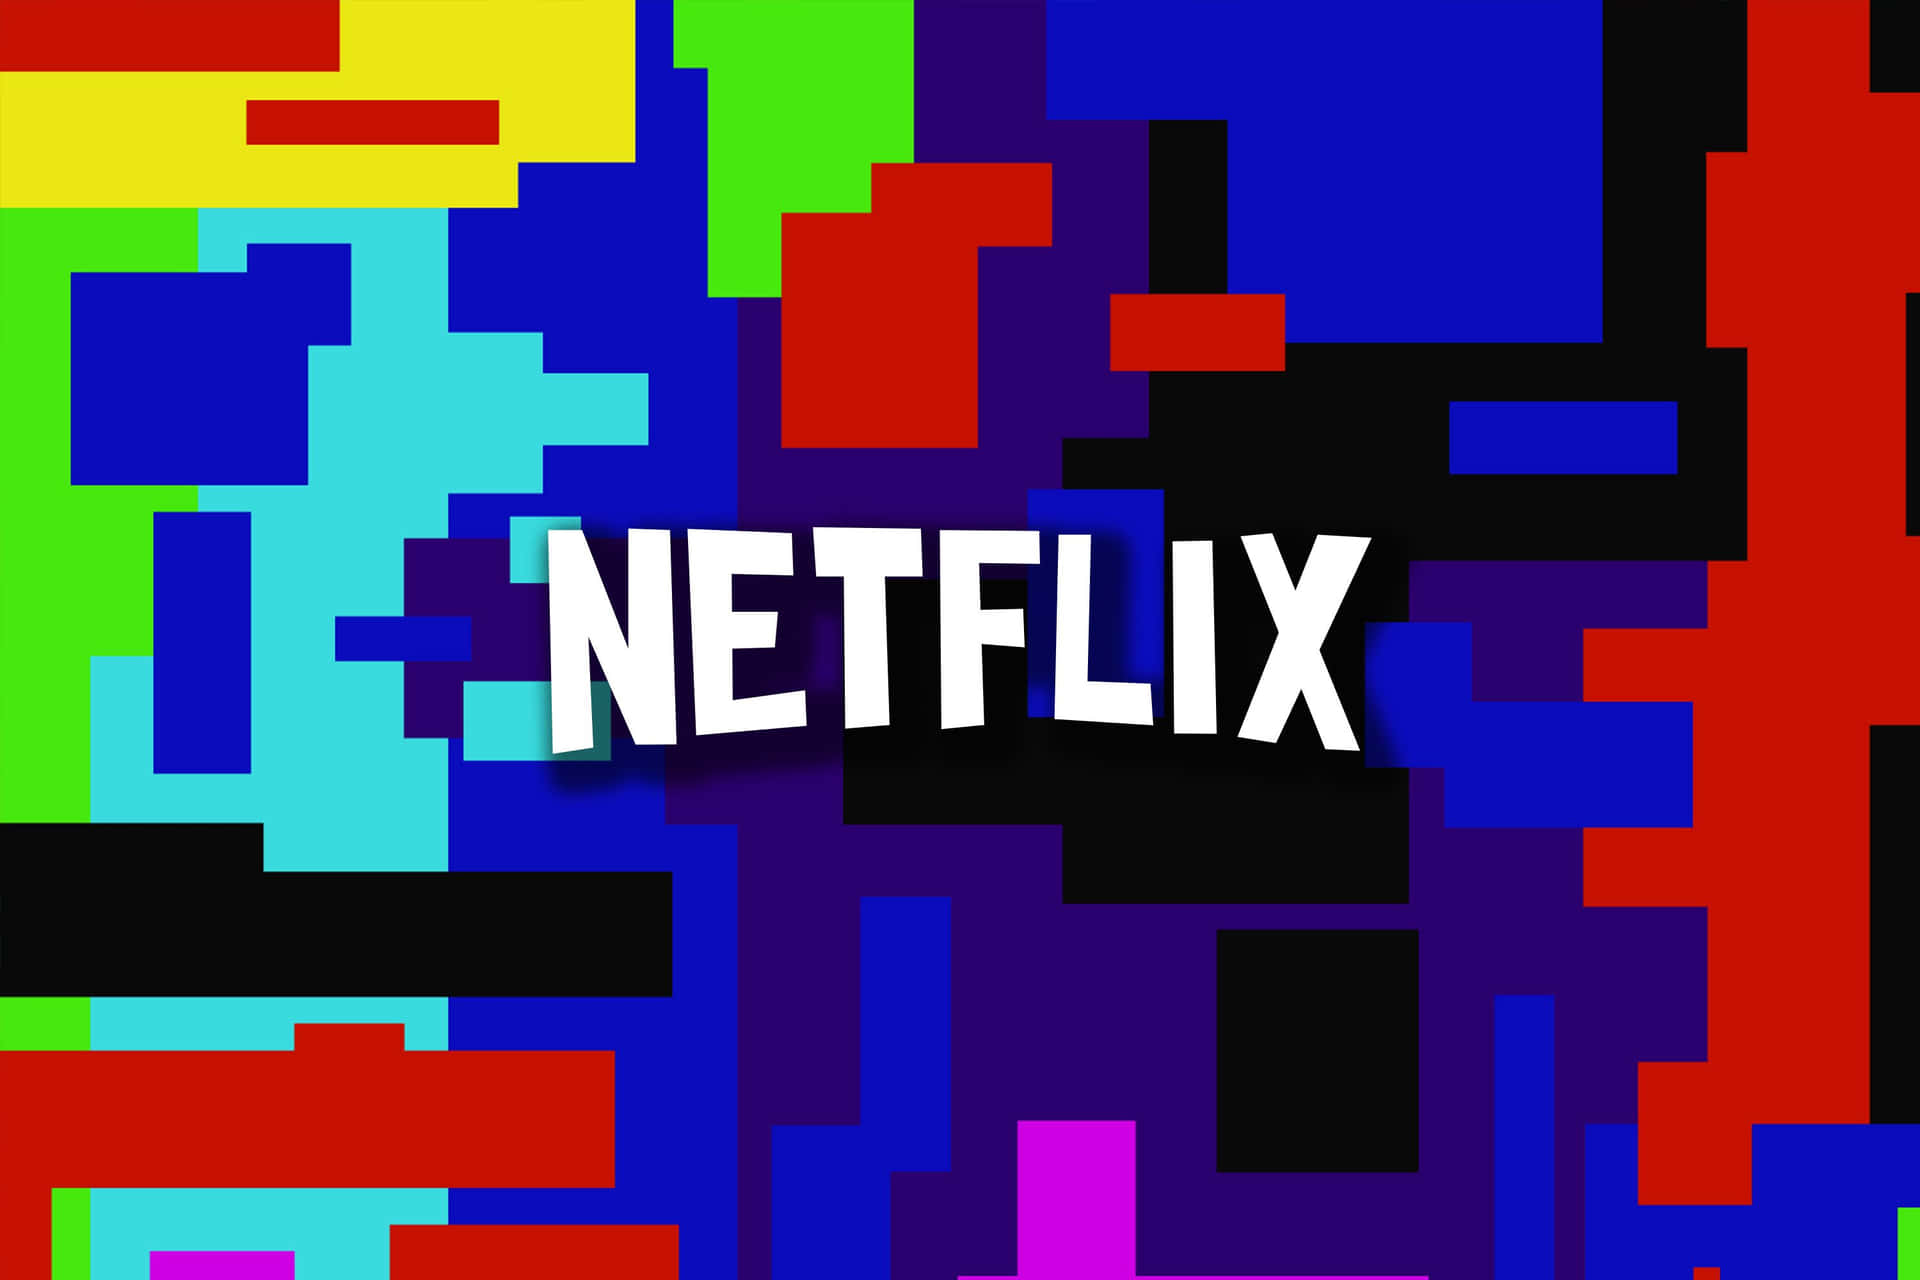 Get ready to stream your favorite content with Netflix